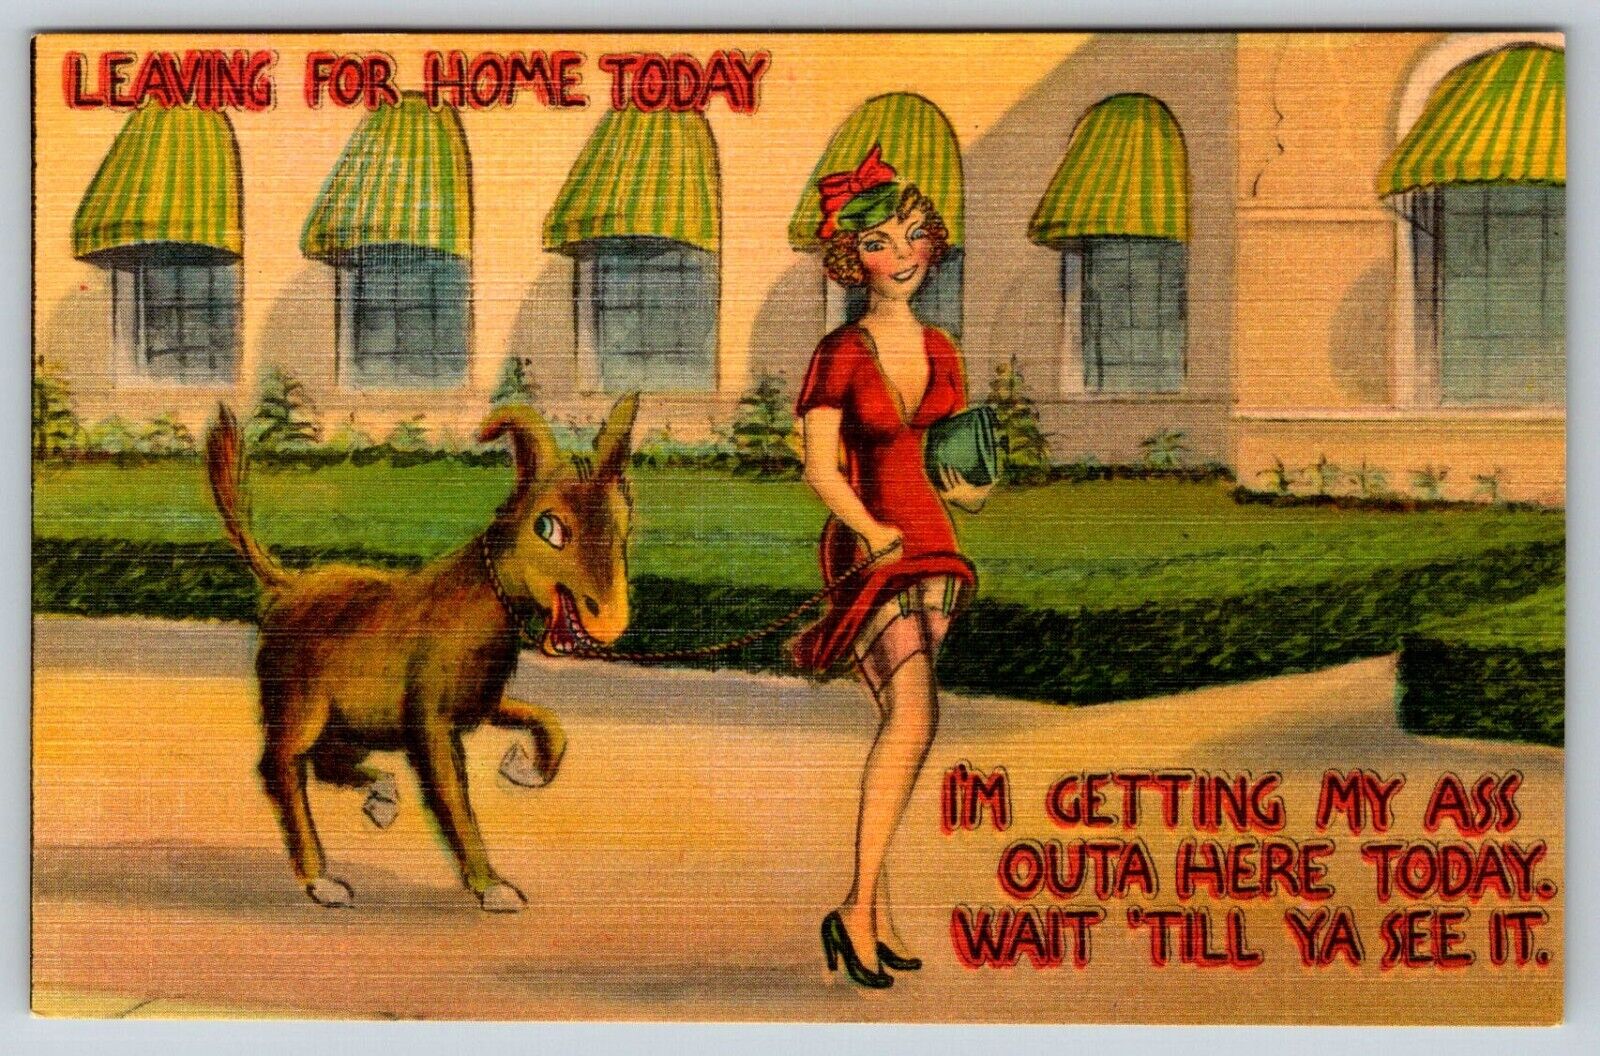 1940s RISQUE POSTCARD I'M GETTING MY ASS OUTA HERE TODAY, WAIT TILL YA SEE IT